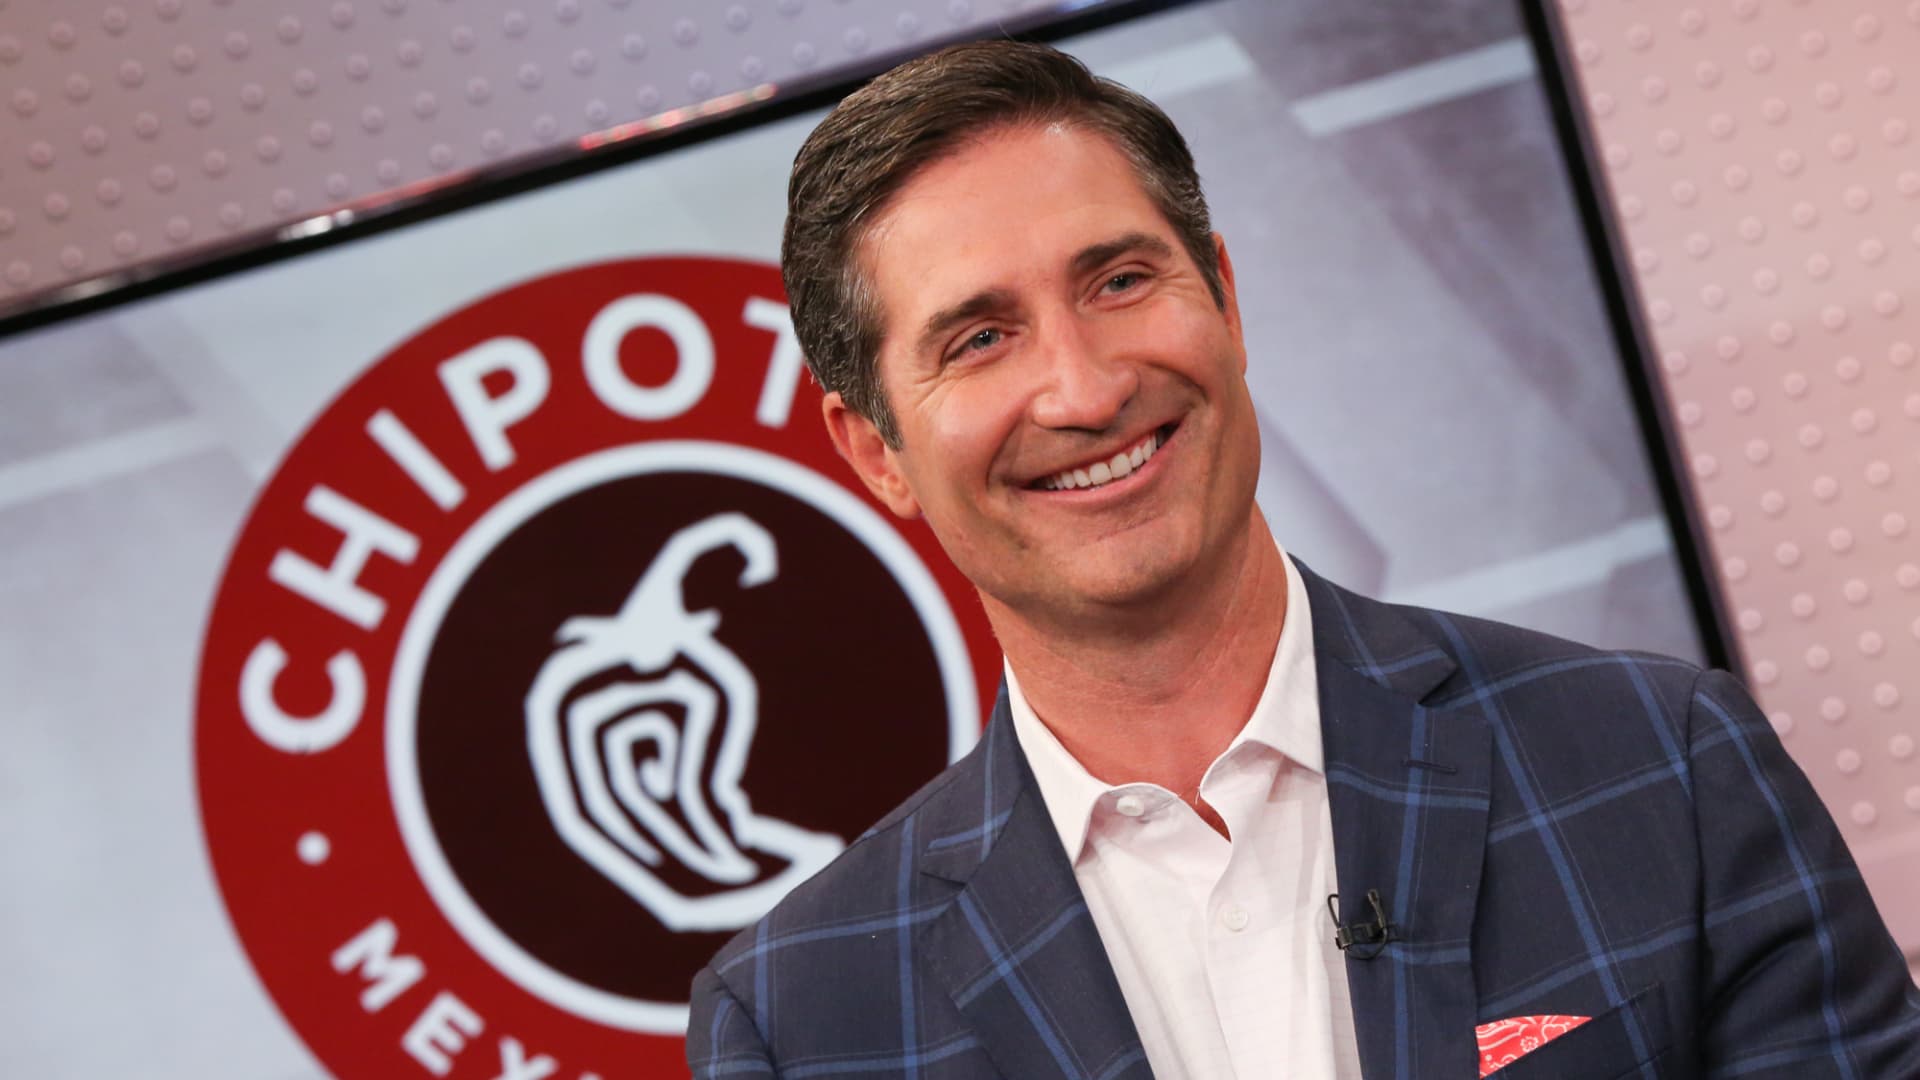 After Chipotle's solid earnings beat, CEO says the chain can double the number of locations